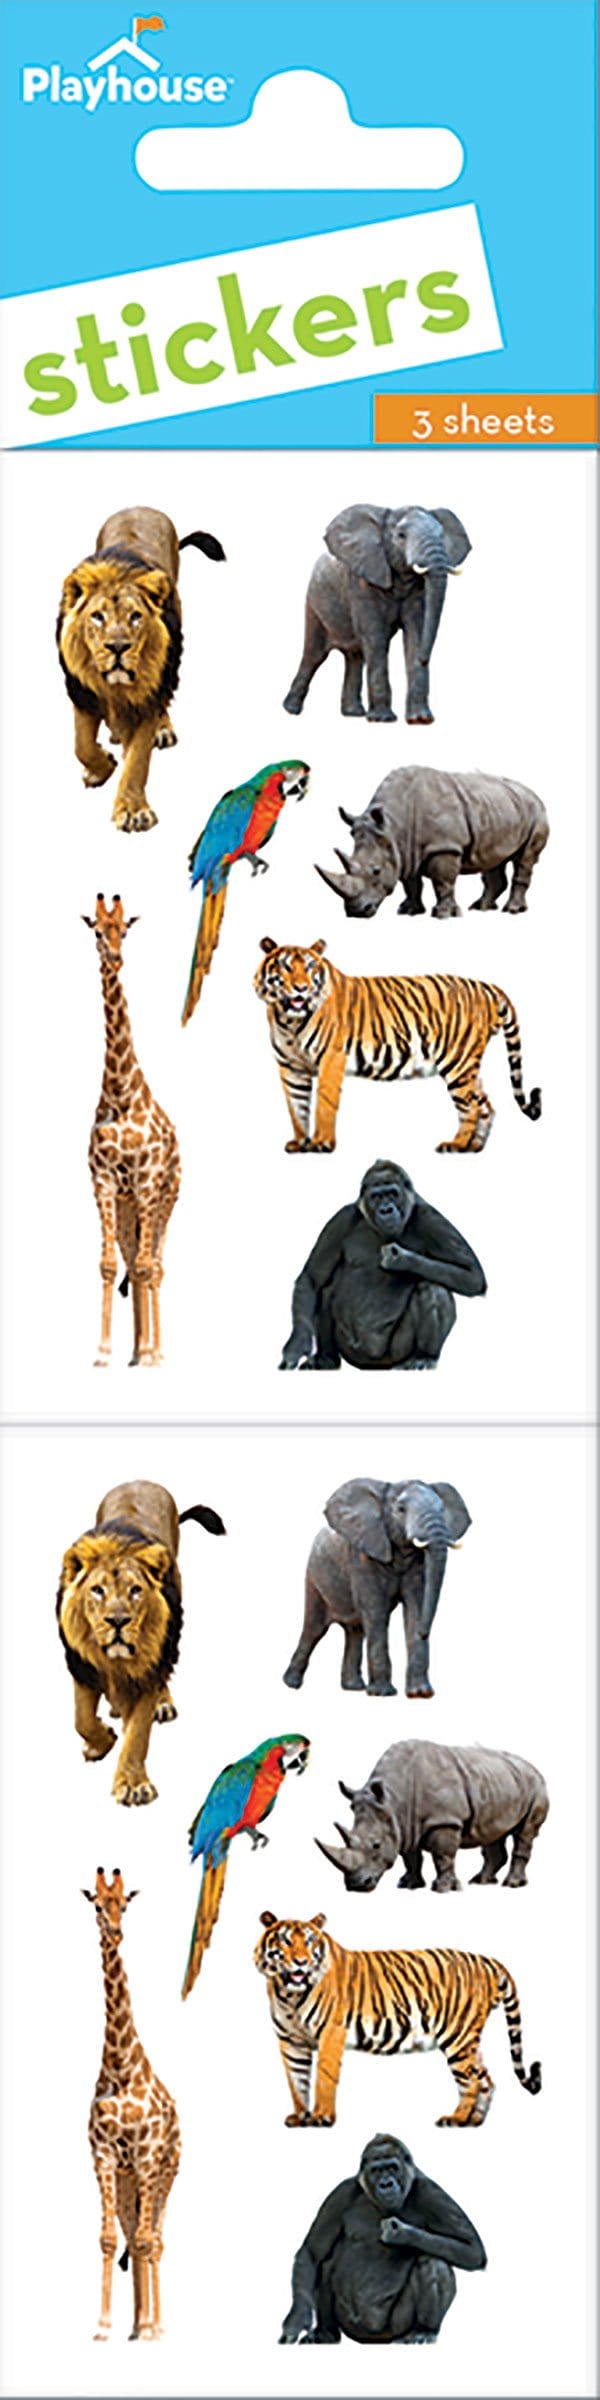 Stickers For Kids - Zoo Animals Pack